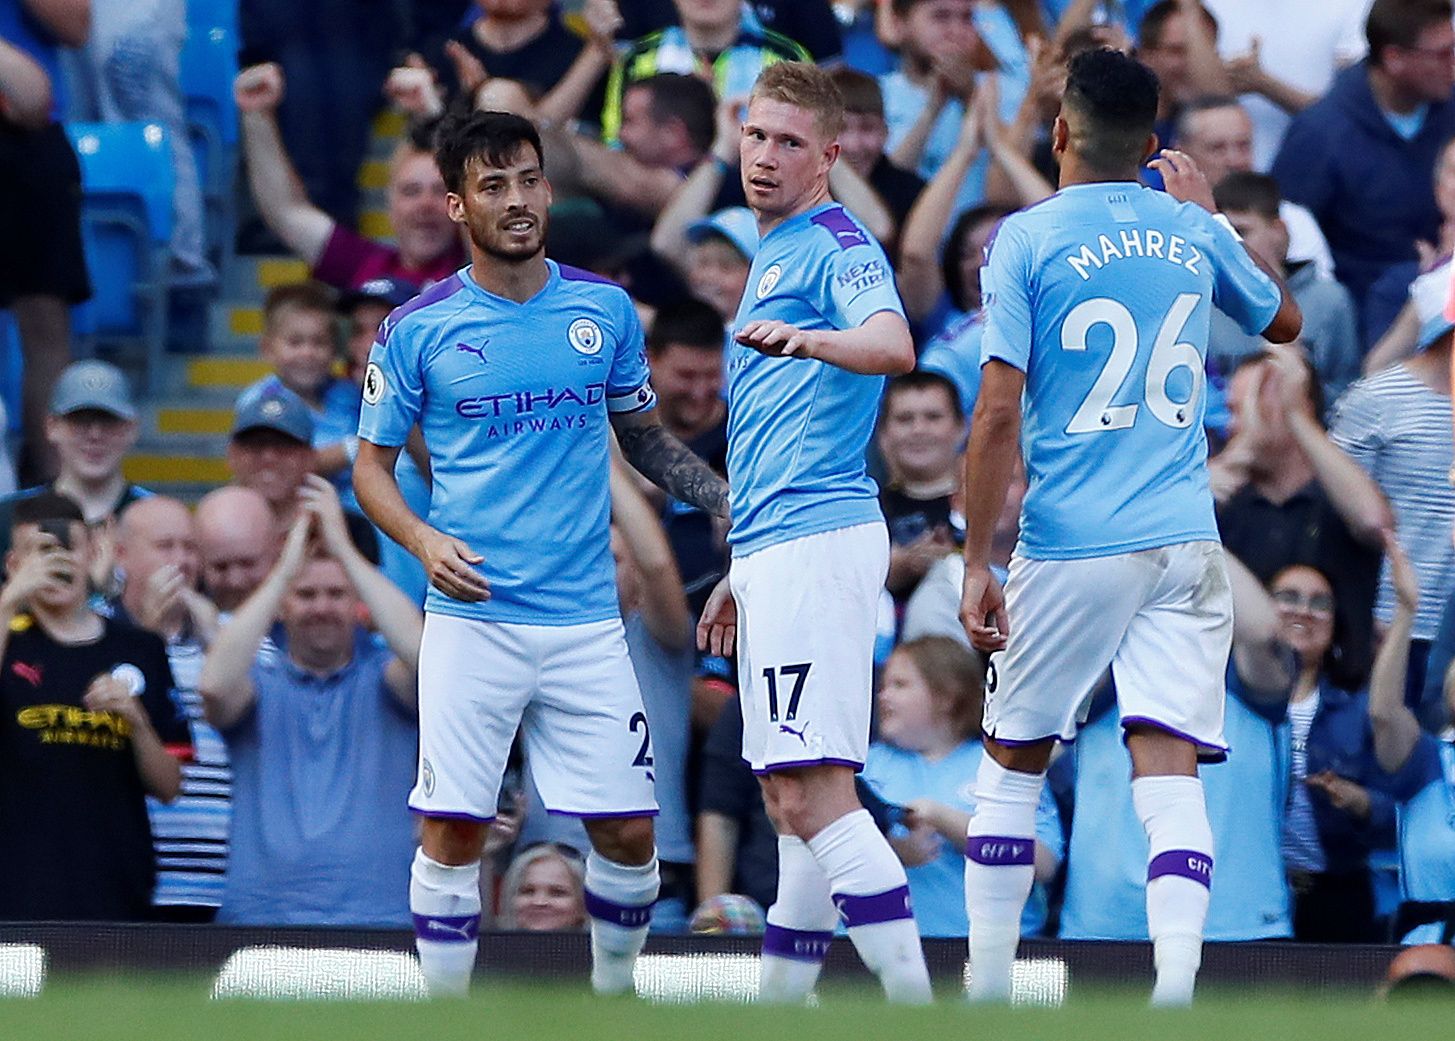 Soccer Football - Premier League - Manchester City v Watford - Etihad Stadium, Manchester, Britain - September 21, 2019  Manchester City's Kevin De Bruyne celebrates scoring their eighth goal with teammates David Silva and Riyad Mahrez   Action Images via Reuters/Jason Cairnduff  EDITORIAL USE ONLY. No use with unauthorized audio, video, data, fixture lists, club/league logos or 